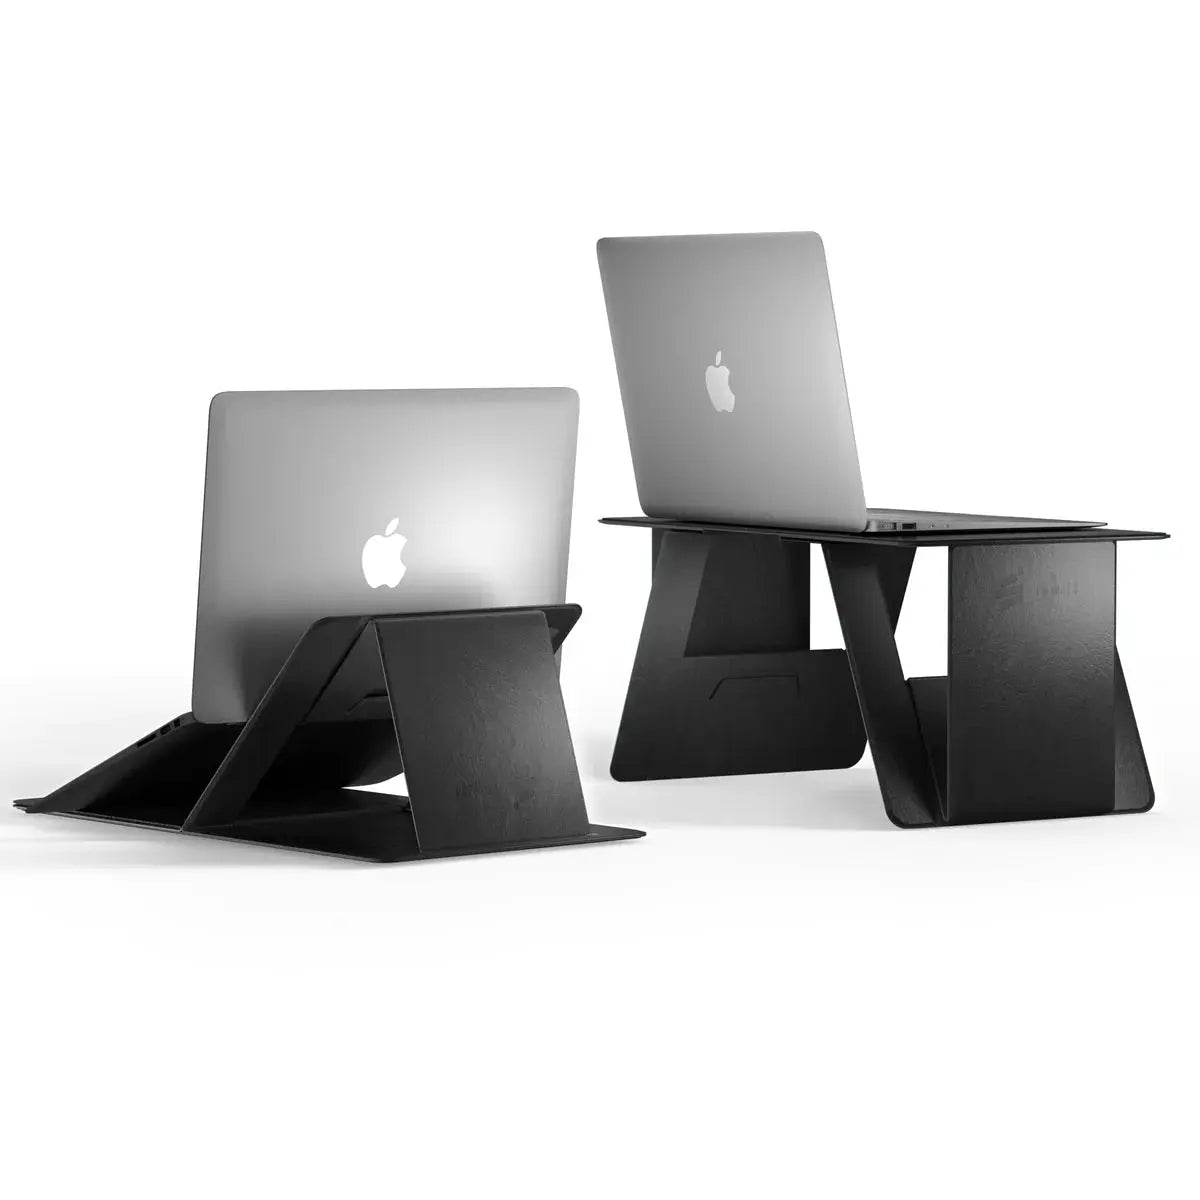 iSwift Pi Paper-Thin Durable Laptop Desk for Bed and Office5